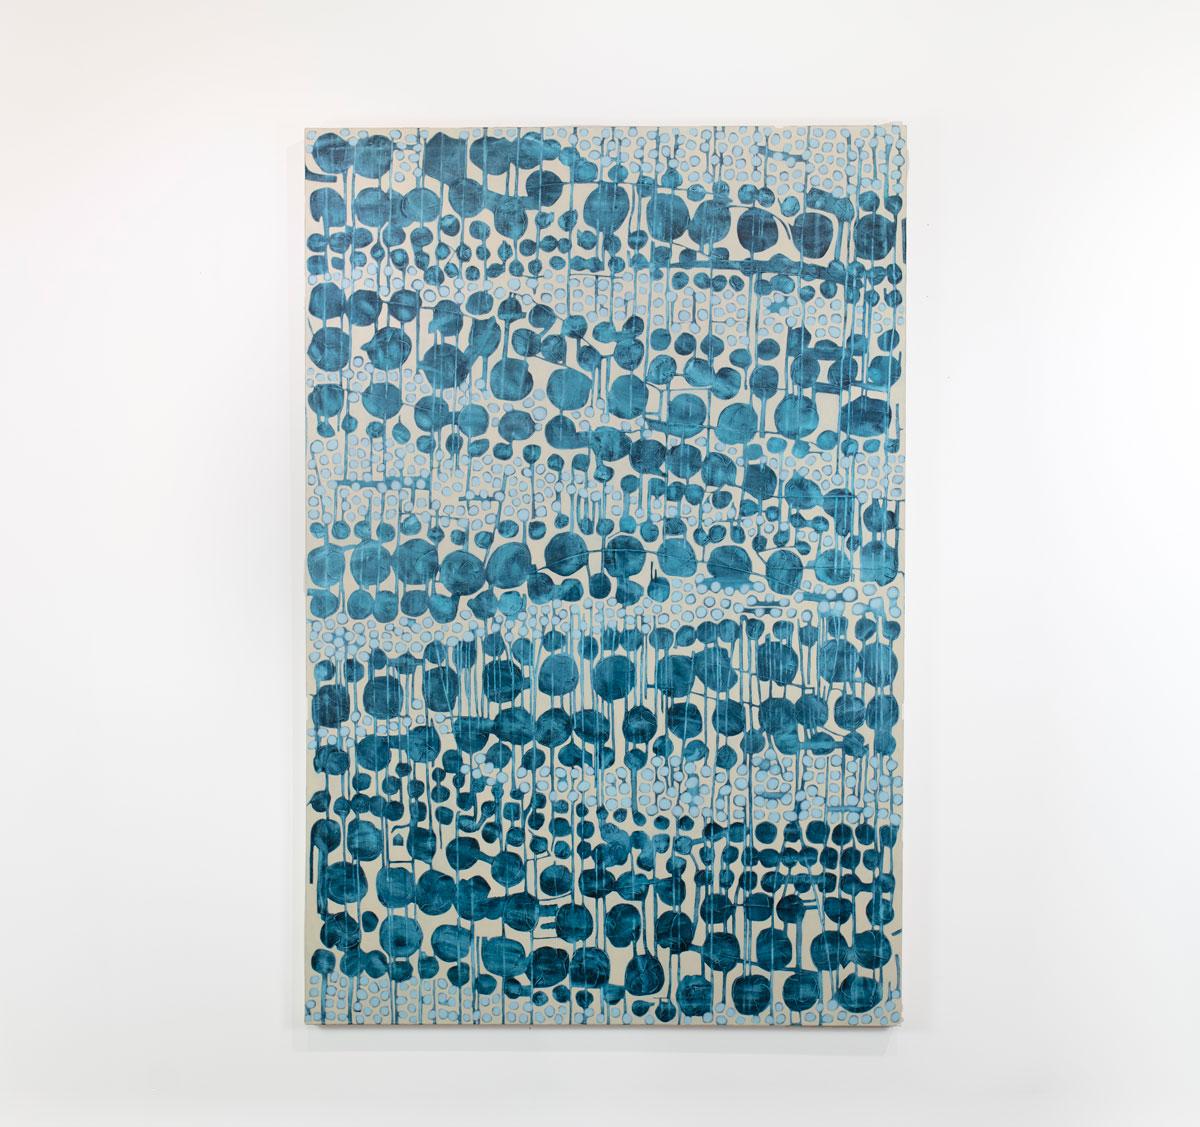 This large abstract statement painting by Sofie Swann features a light blue, sandy beige, and deep teal blue palette, with varying organic circular shapes layered and arranged in a loose zig-zag formation throughout the canvas. This painting is made